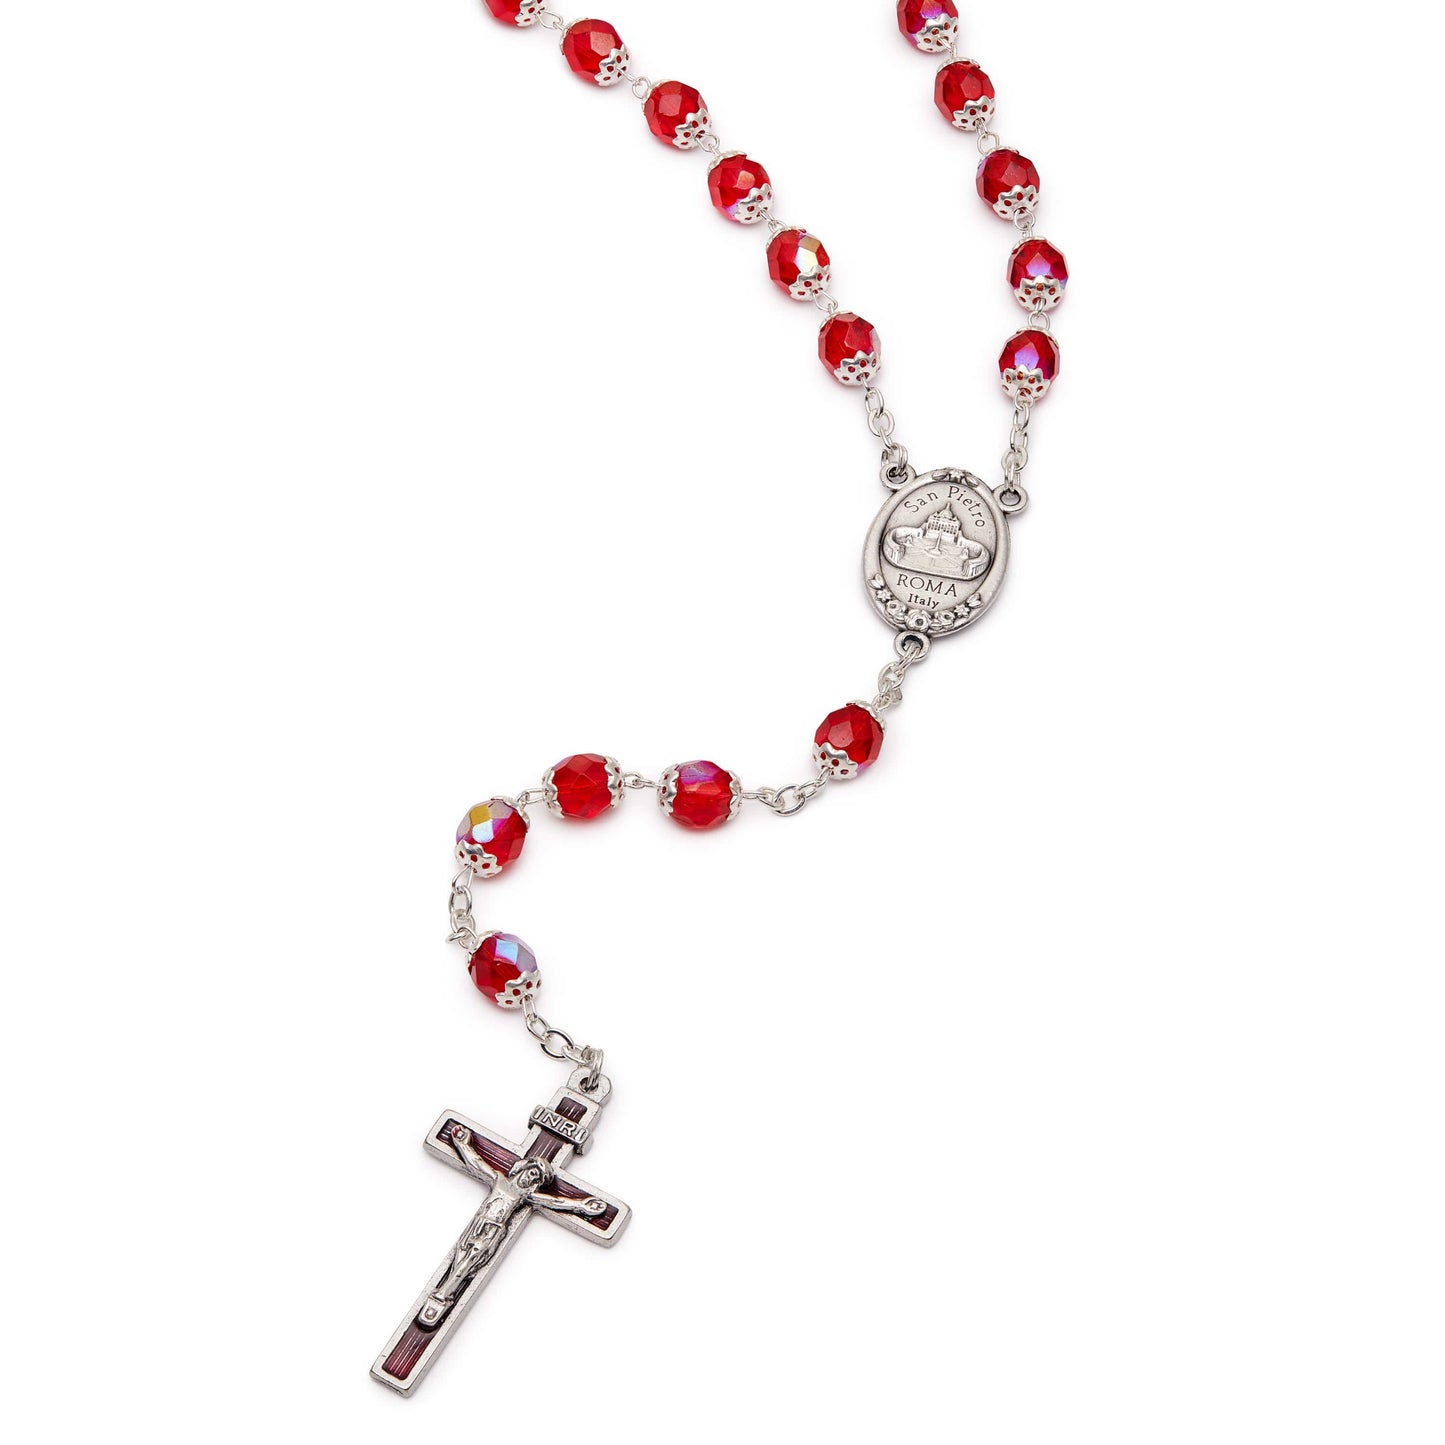 Our Lady of Good Health Traditional Rosary in Faceted Crystal Beads